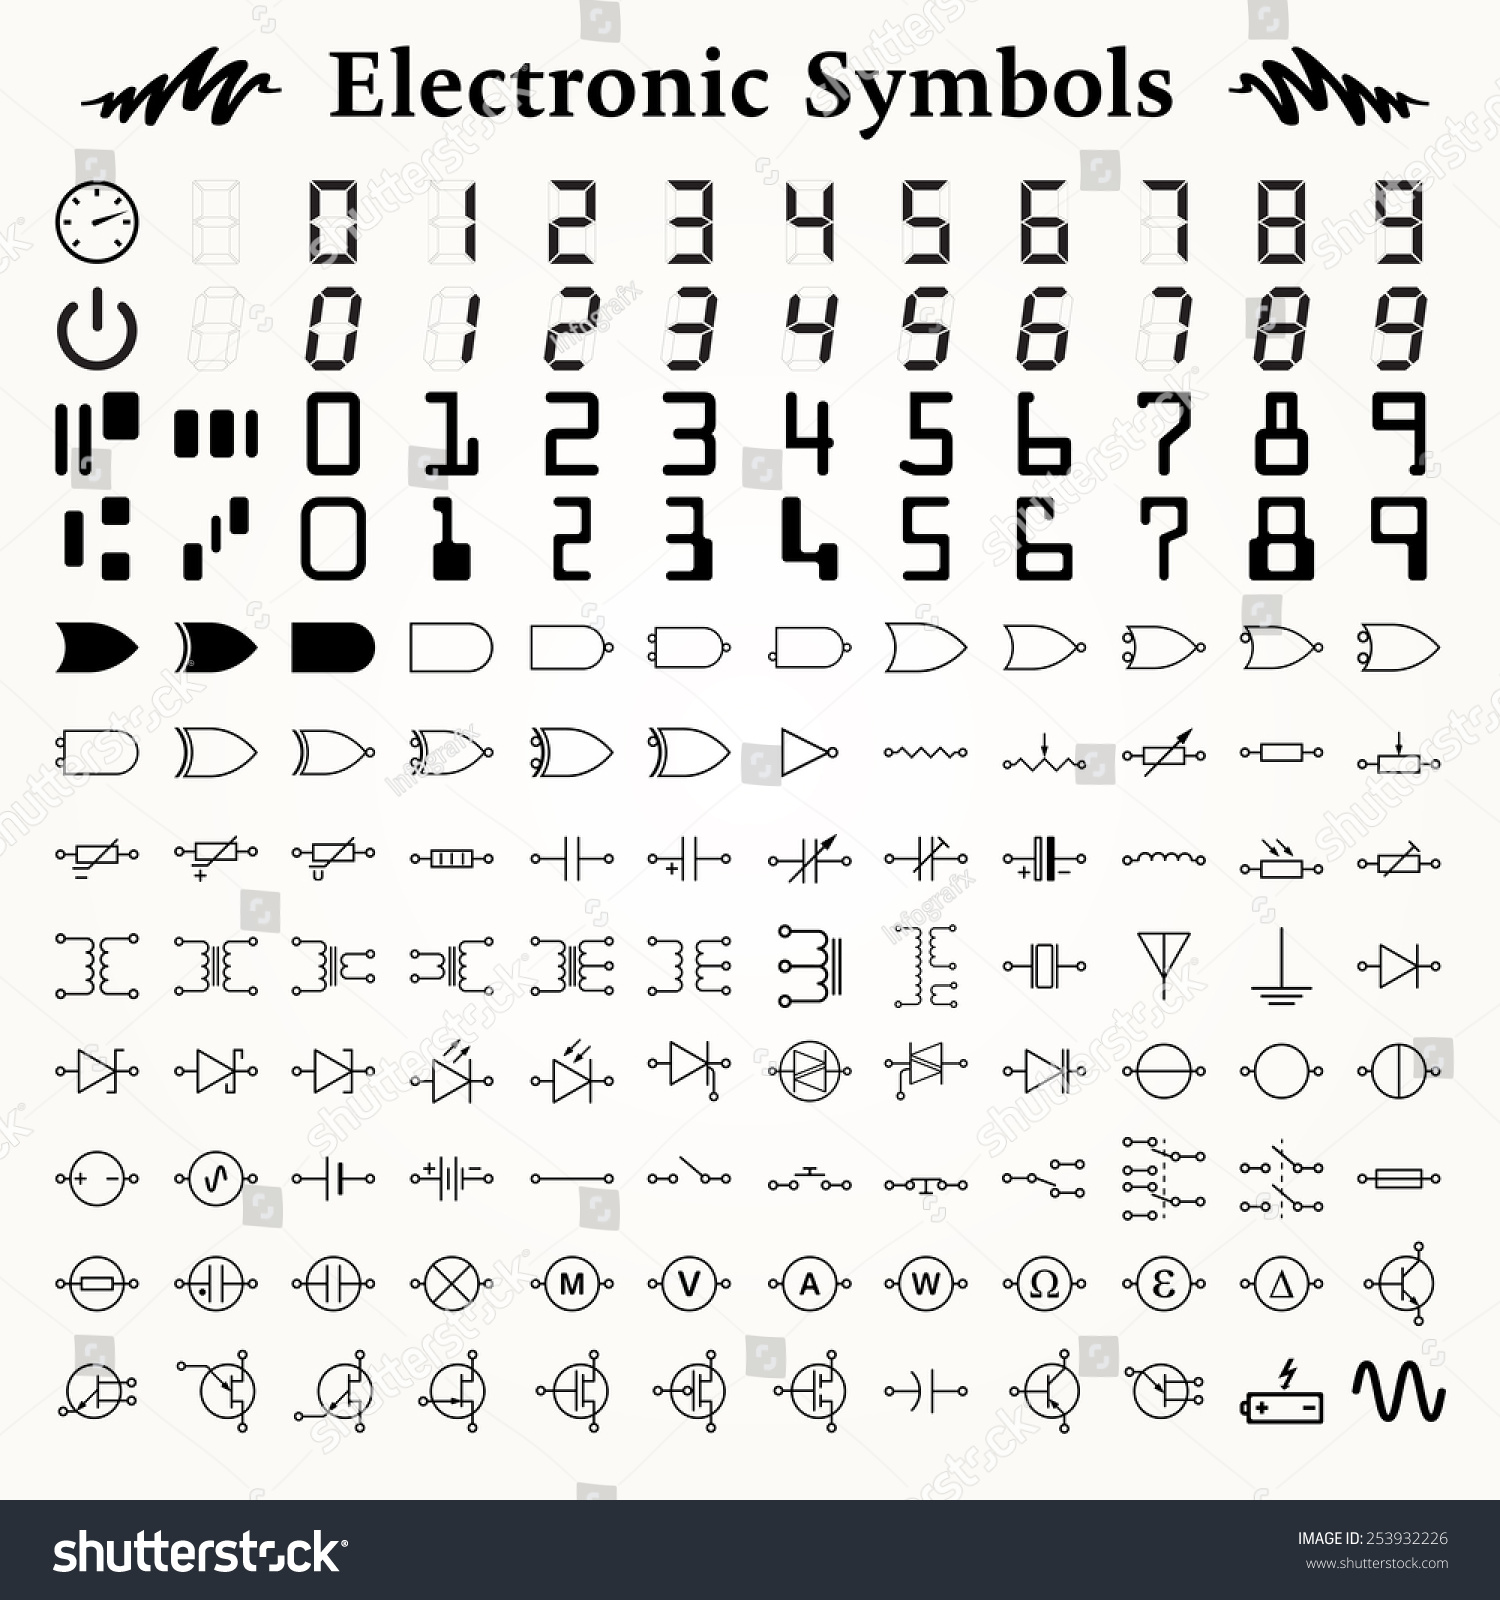 Elements Of Electronic Symbols Icons And Signs For Education Logical Design And Circuitry